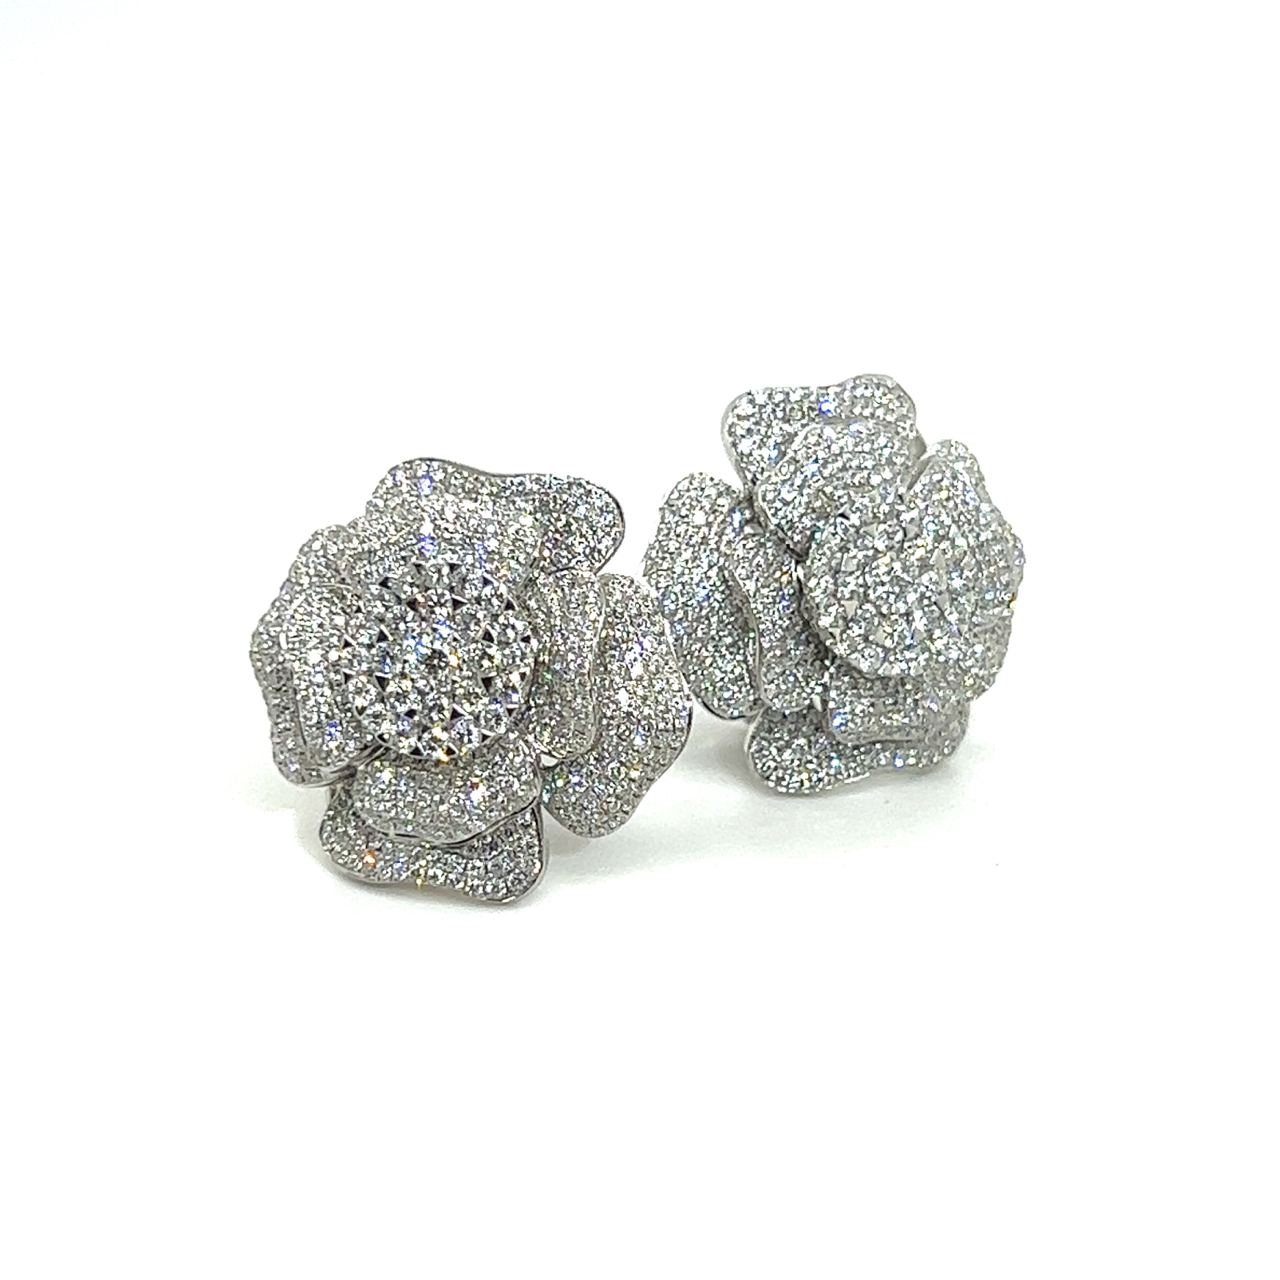 18K White Gold Pave Oval Cluster Diamond Earrings